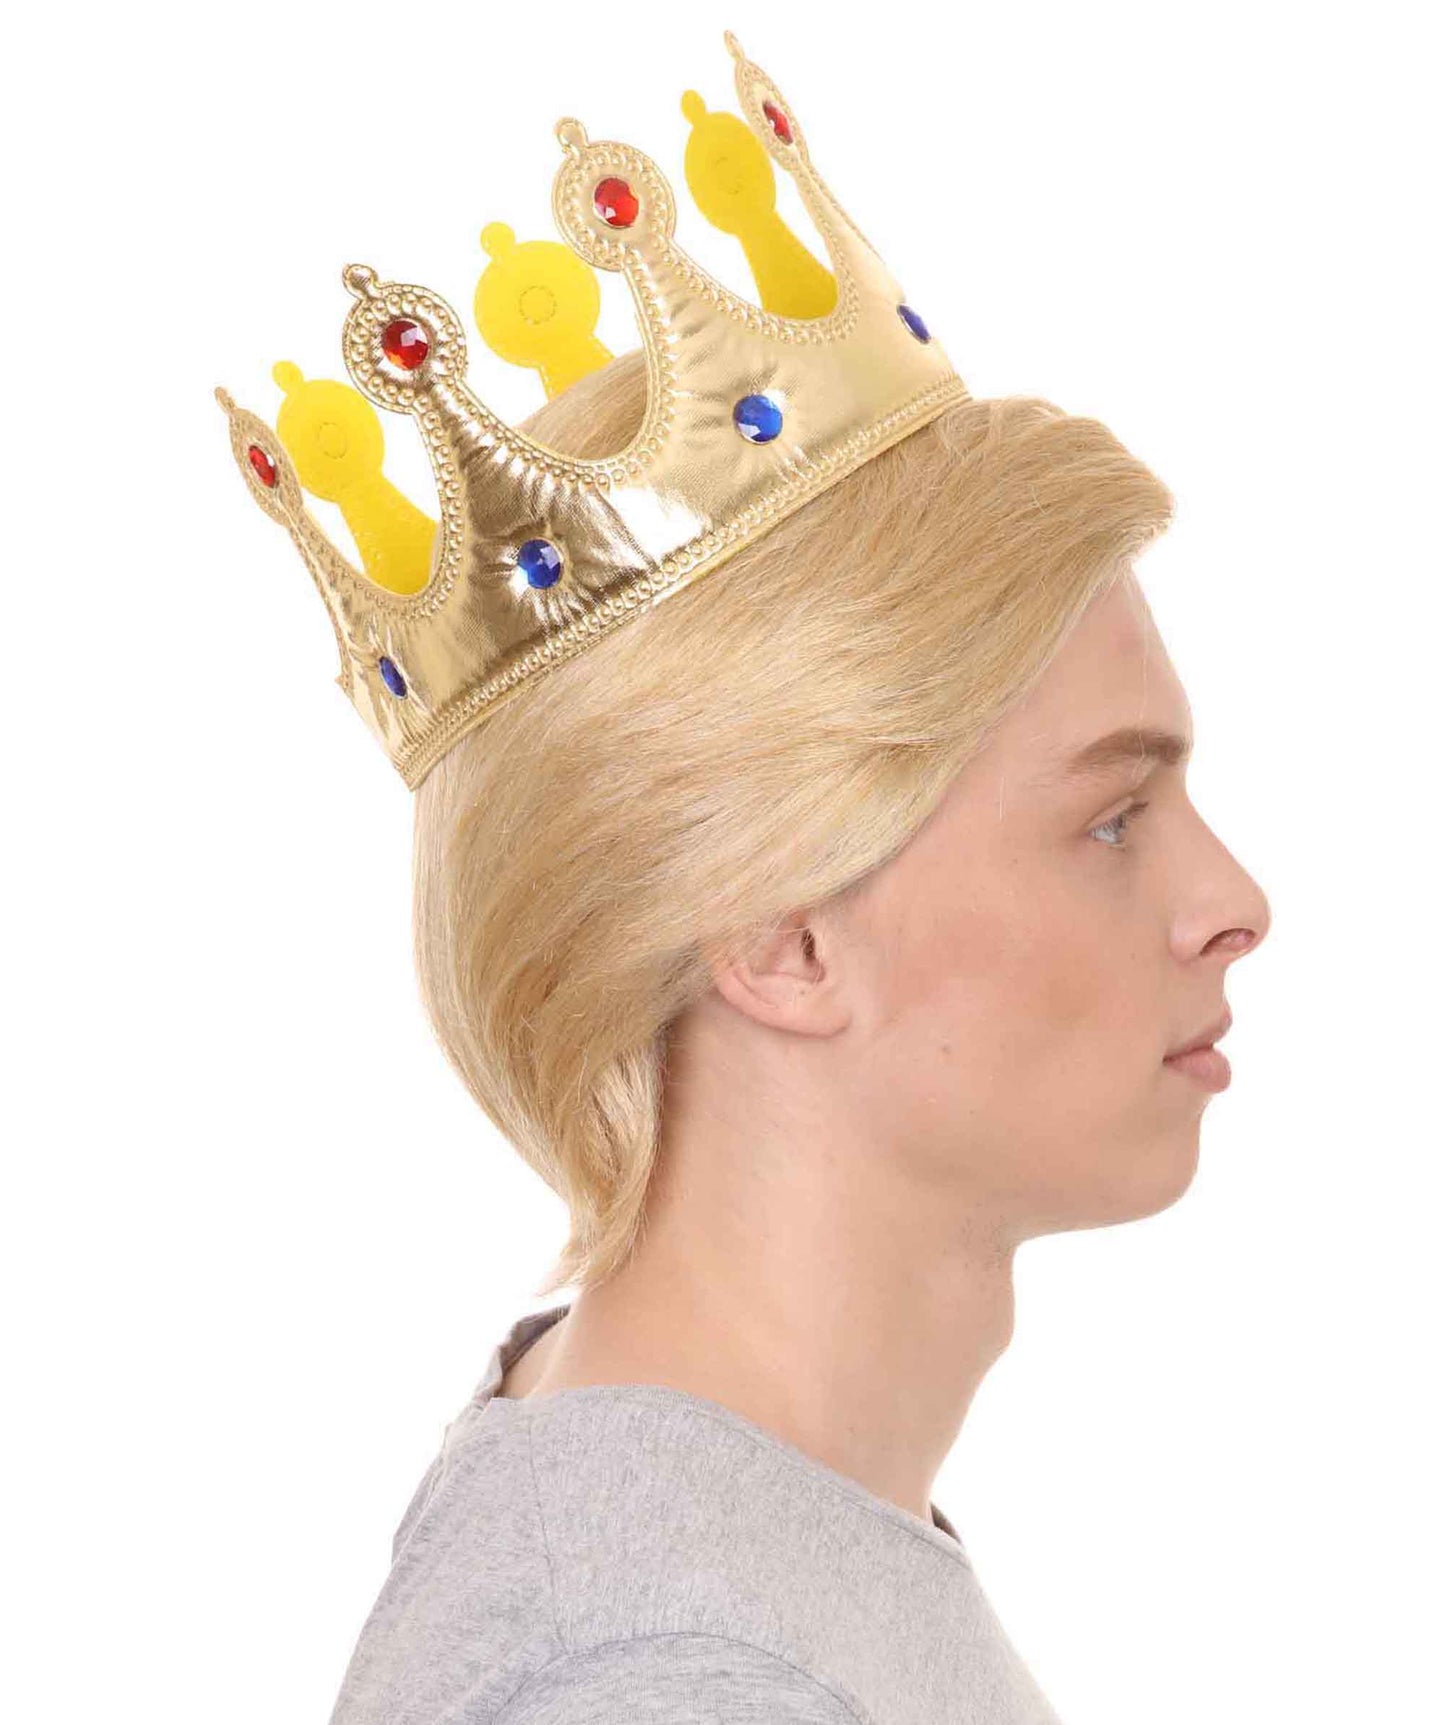 President I Men's Wig, Gold Jeweled Crown Blonde Color Wigs, Premium Breathable Capless Cap